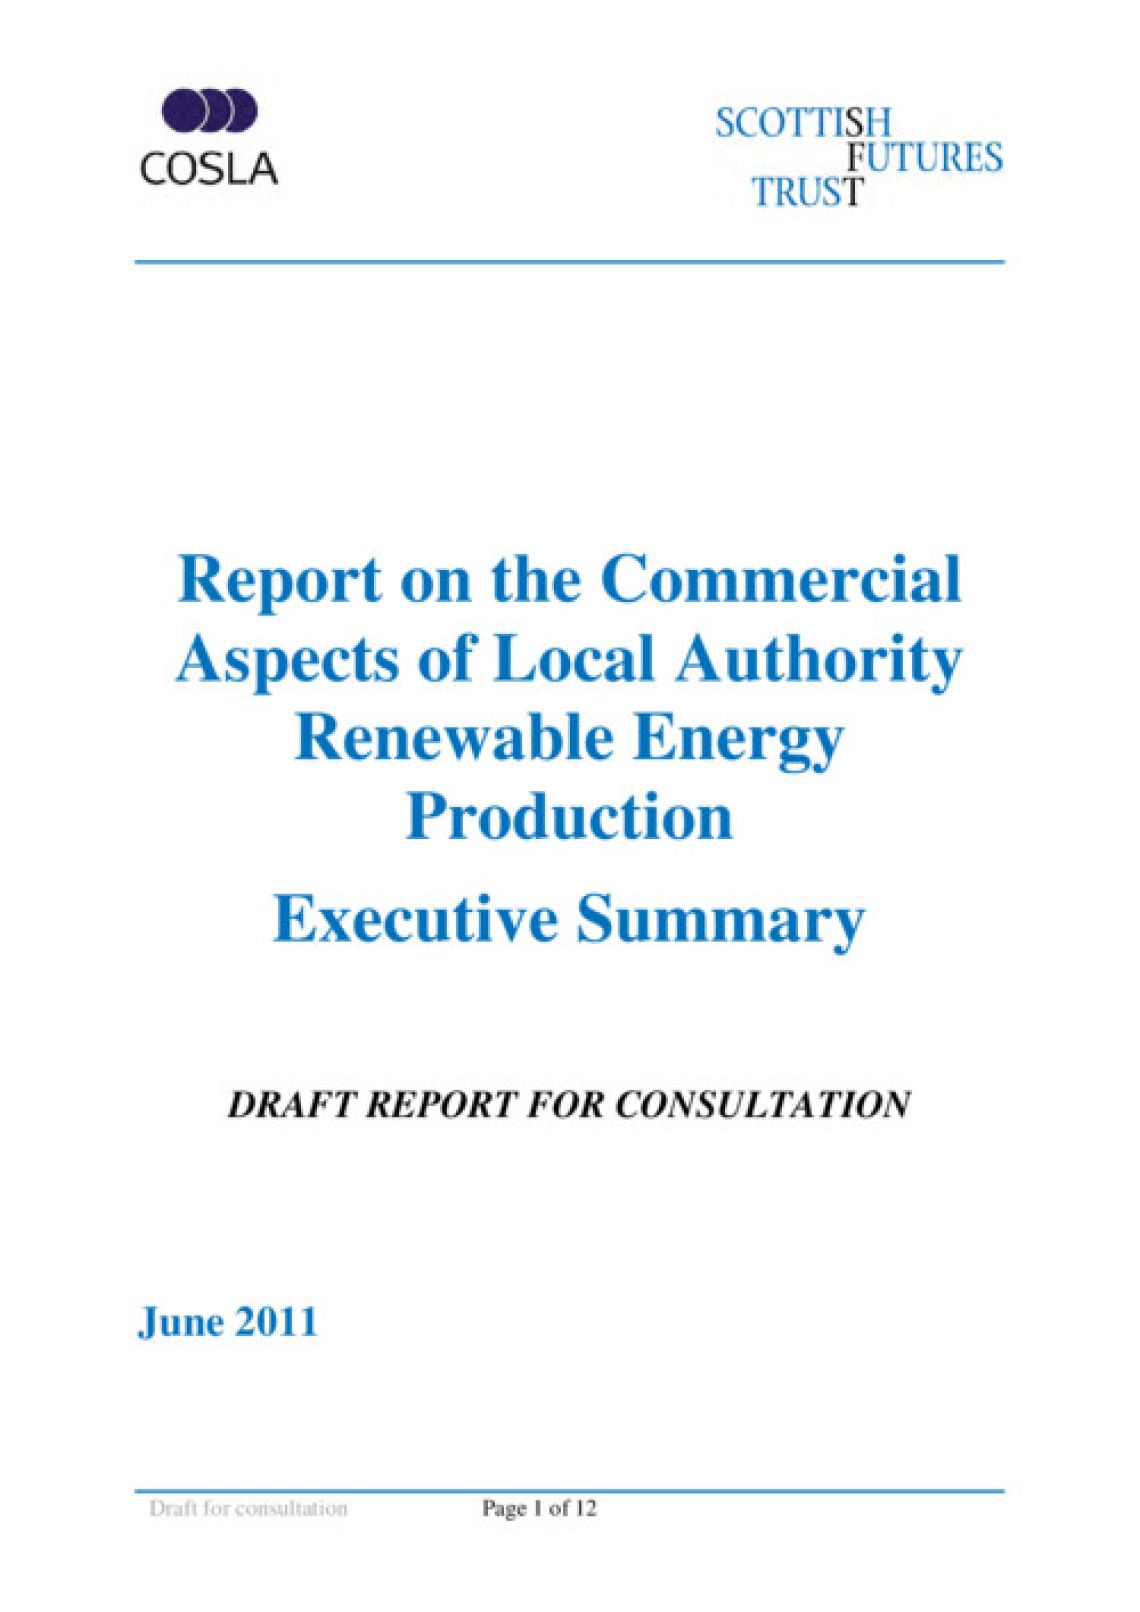 Commercial Aspects Local Authority Renewable Energy Production - Executive Summary cover